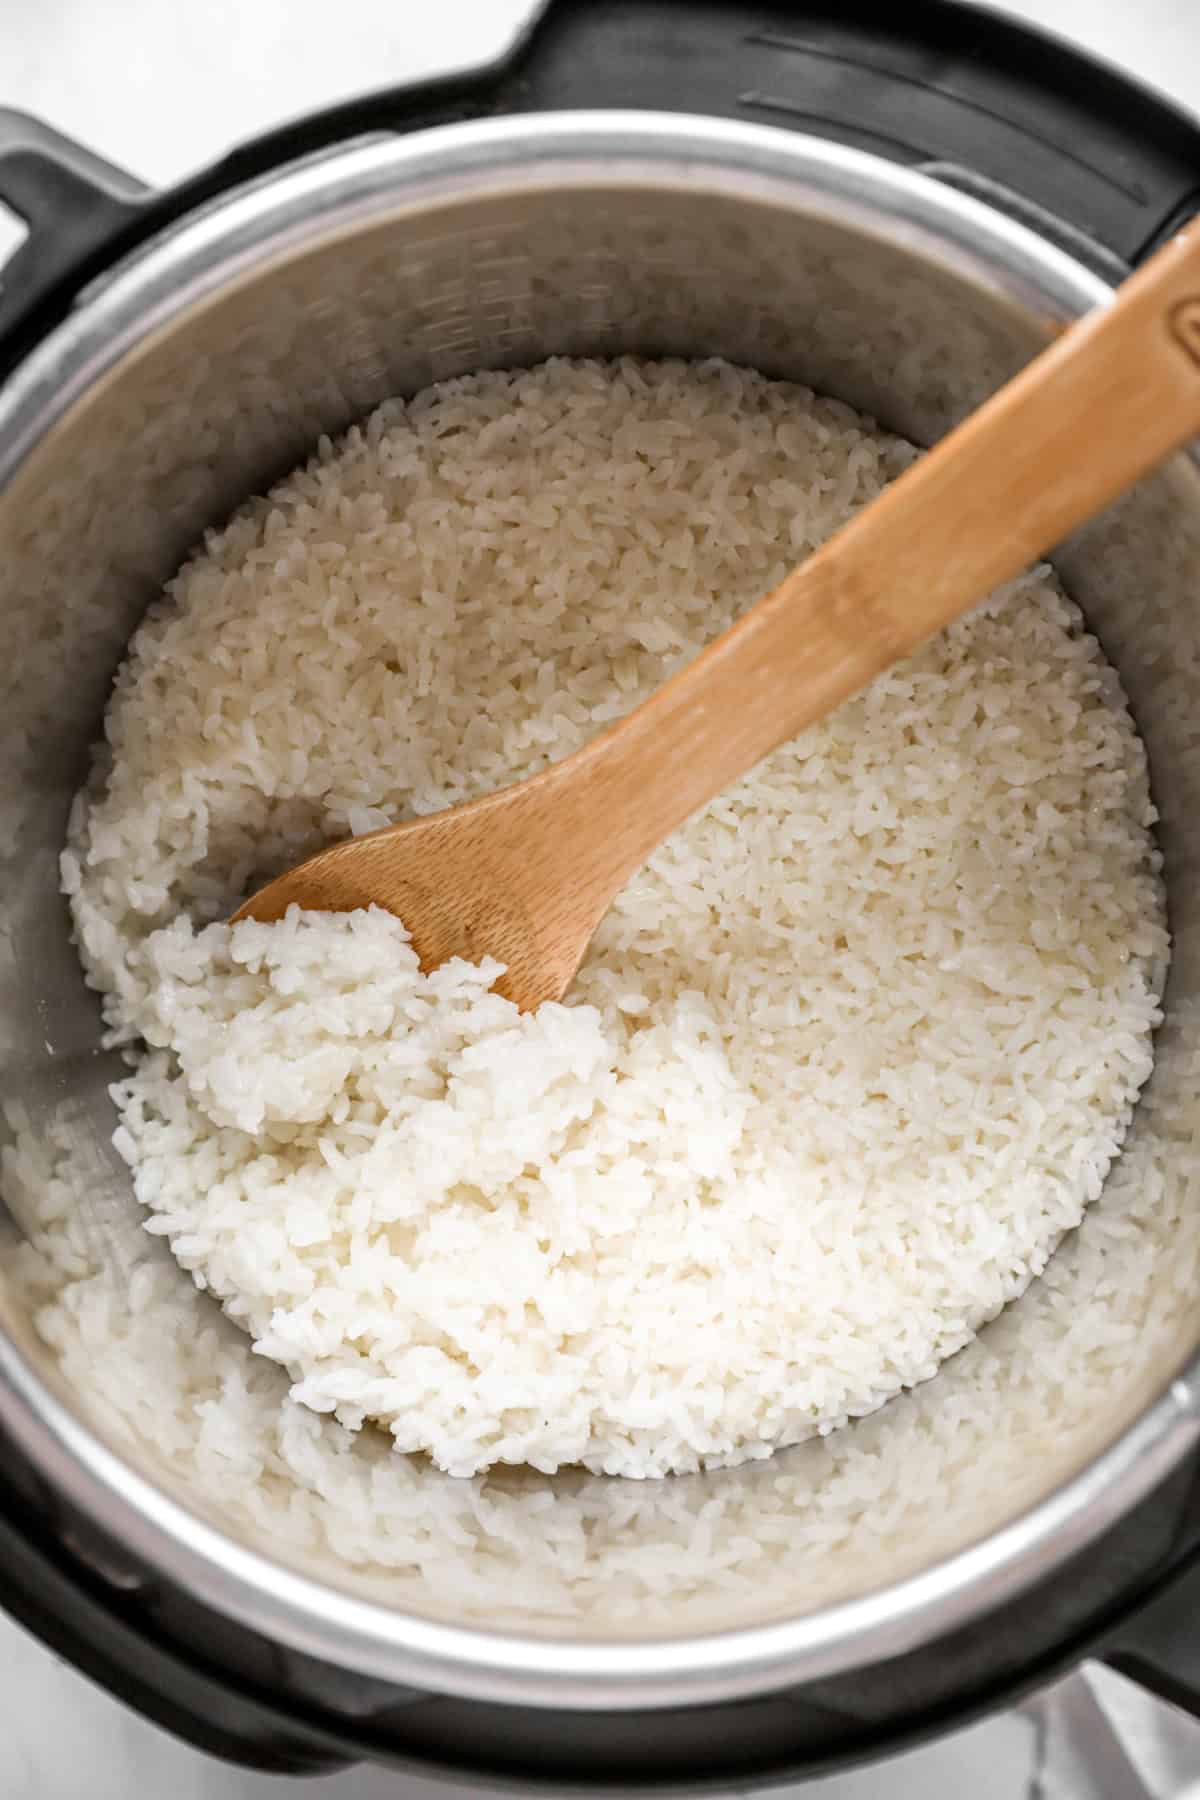 Use a wooden spoon to cook the glutinous rice in the Instant Pot.